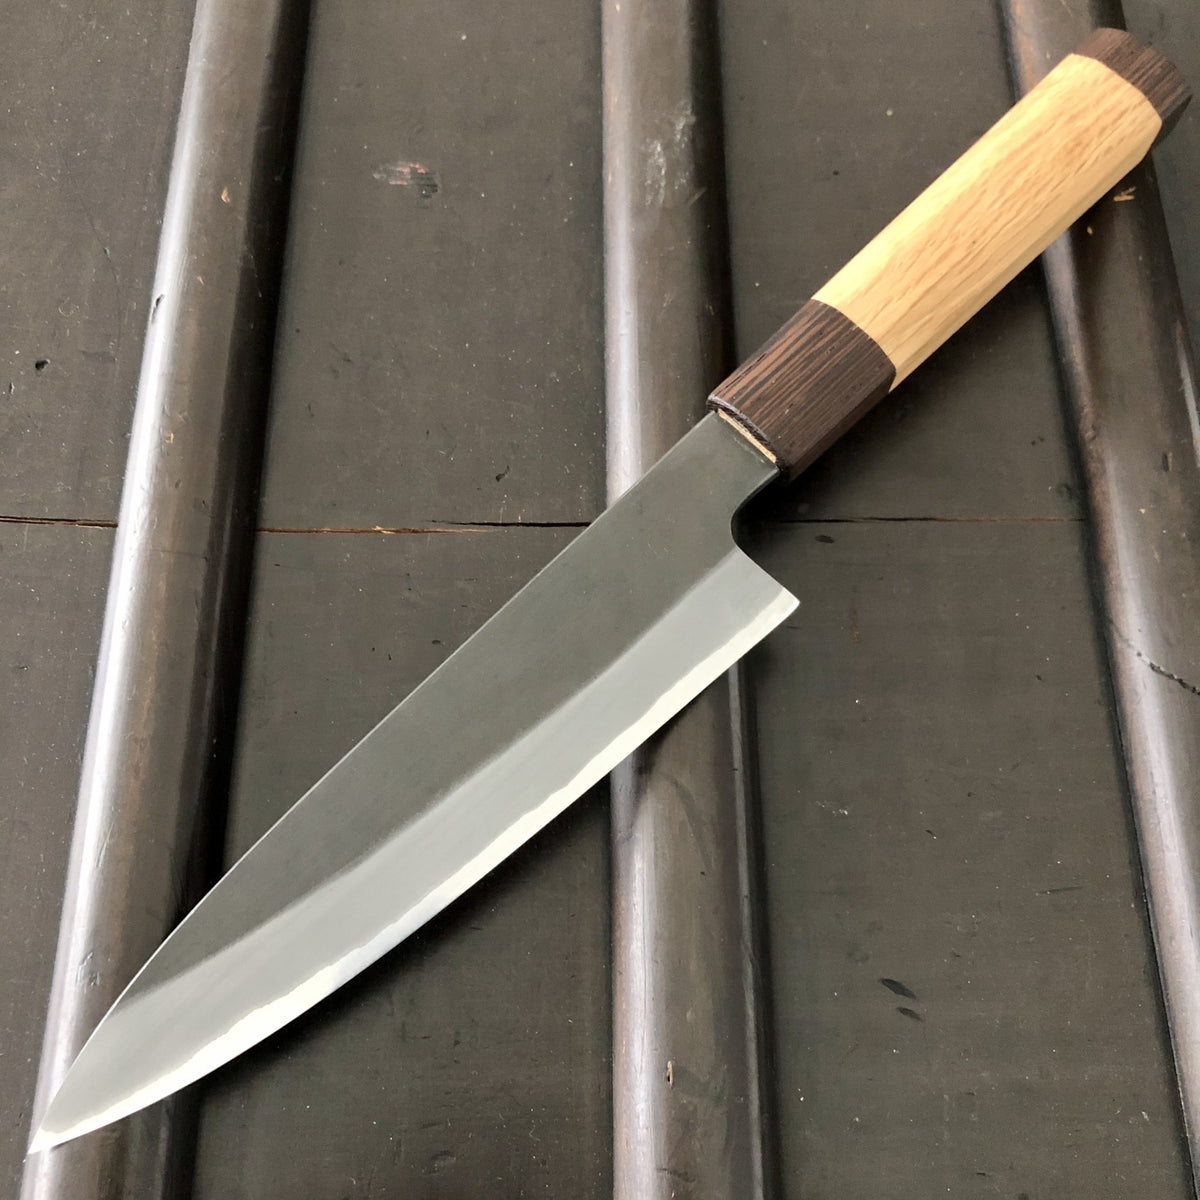 Tagai Sanjo 150mm Petty Stainless Clad Shirogami 2 Oak and Wenge Handle